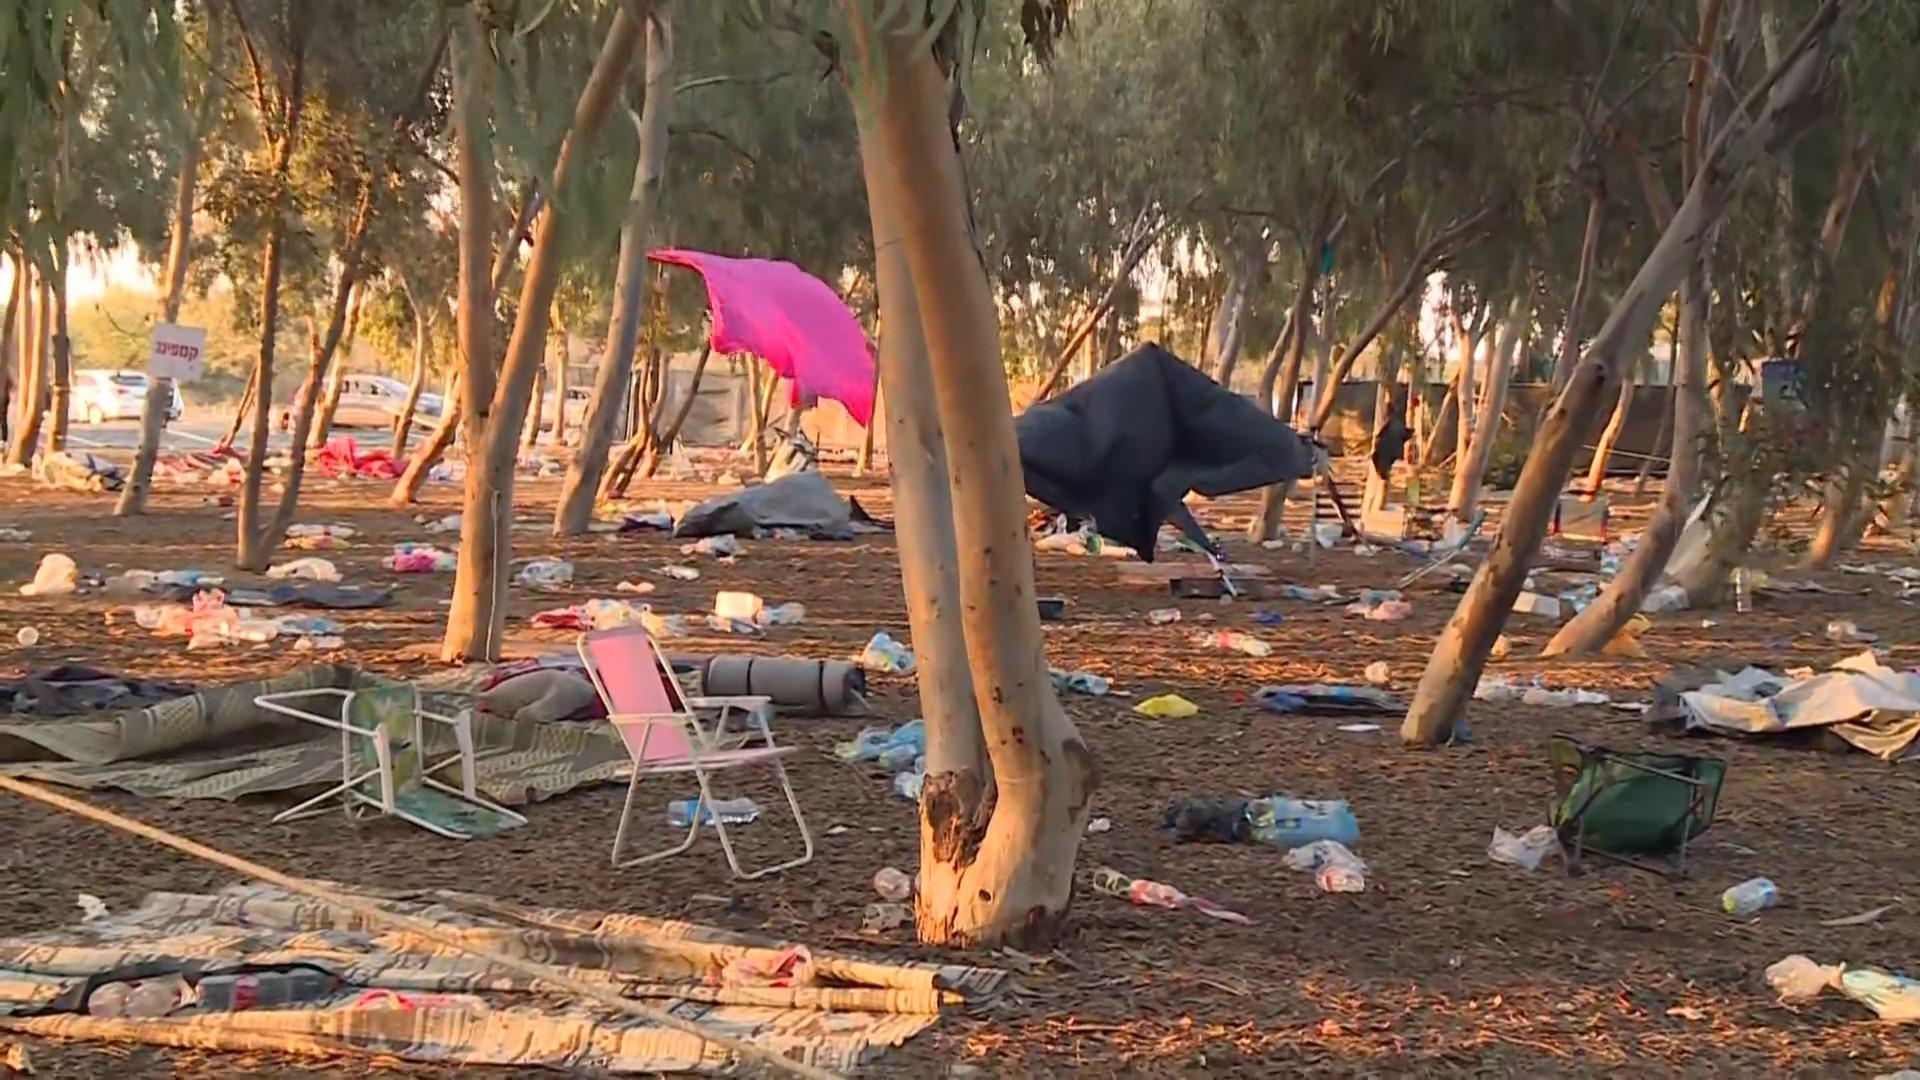 This is what the festival site looks like now The current situation in Israel